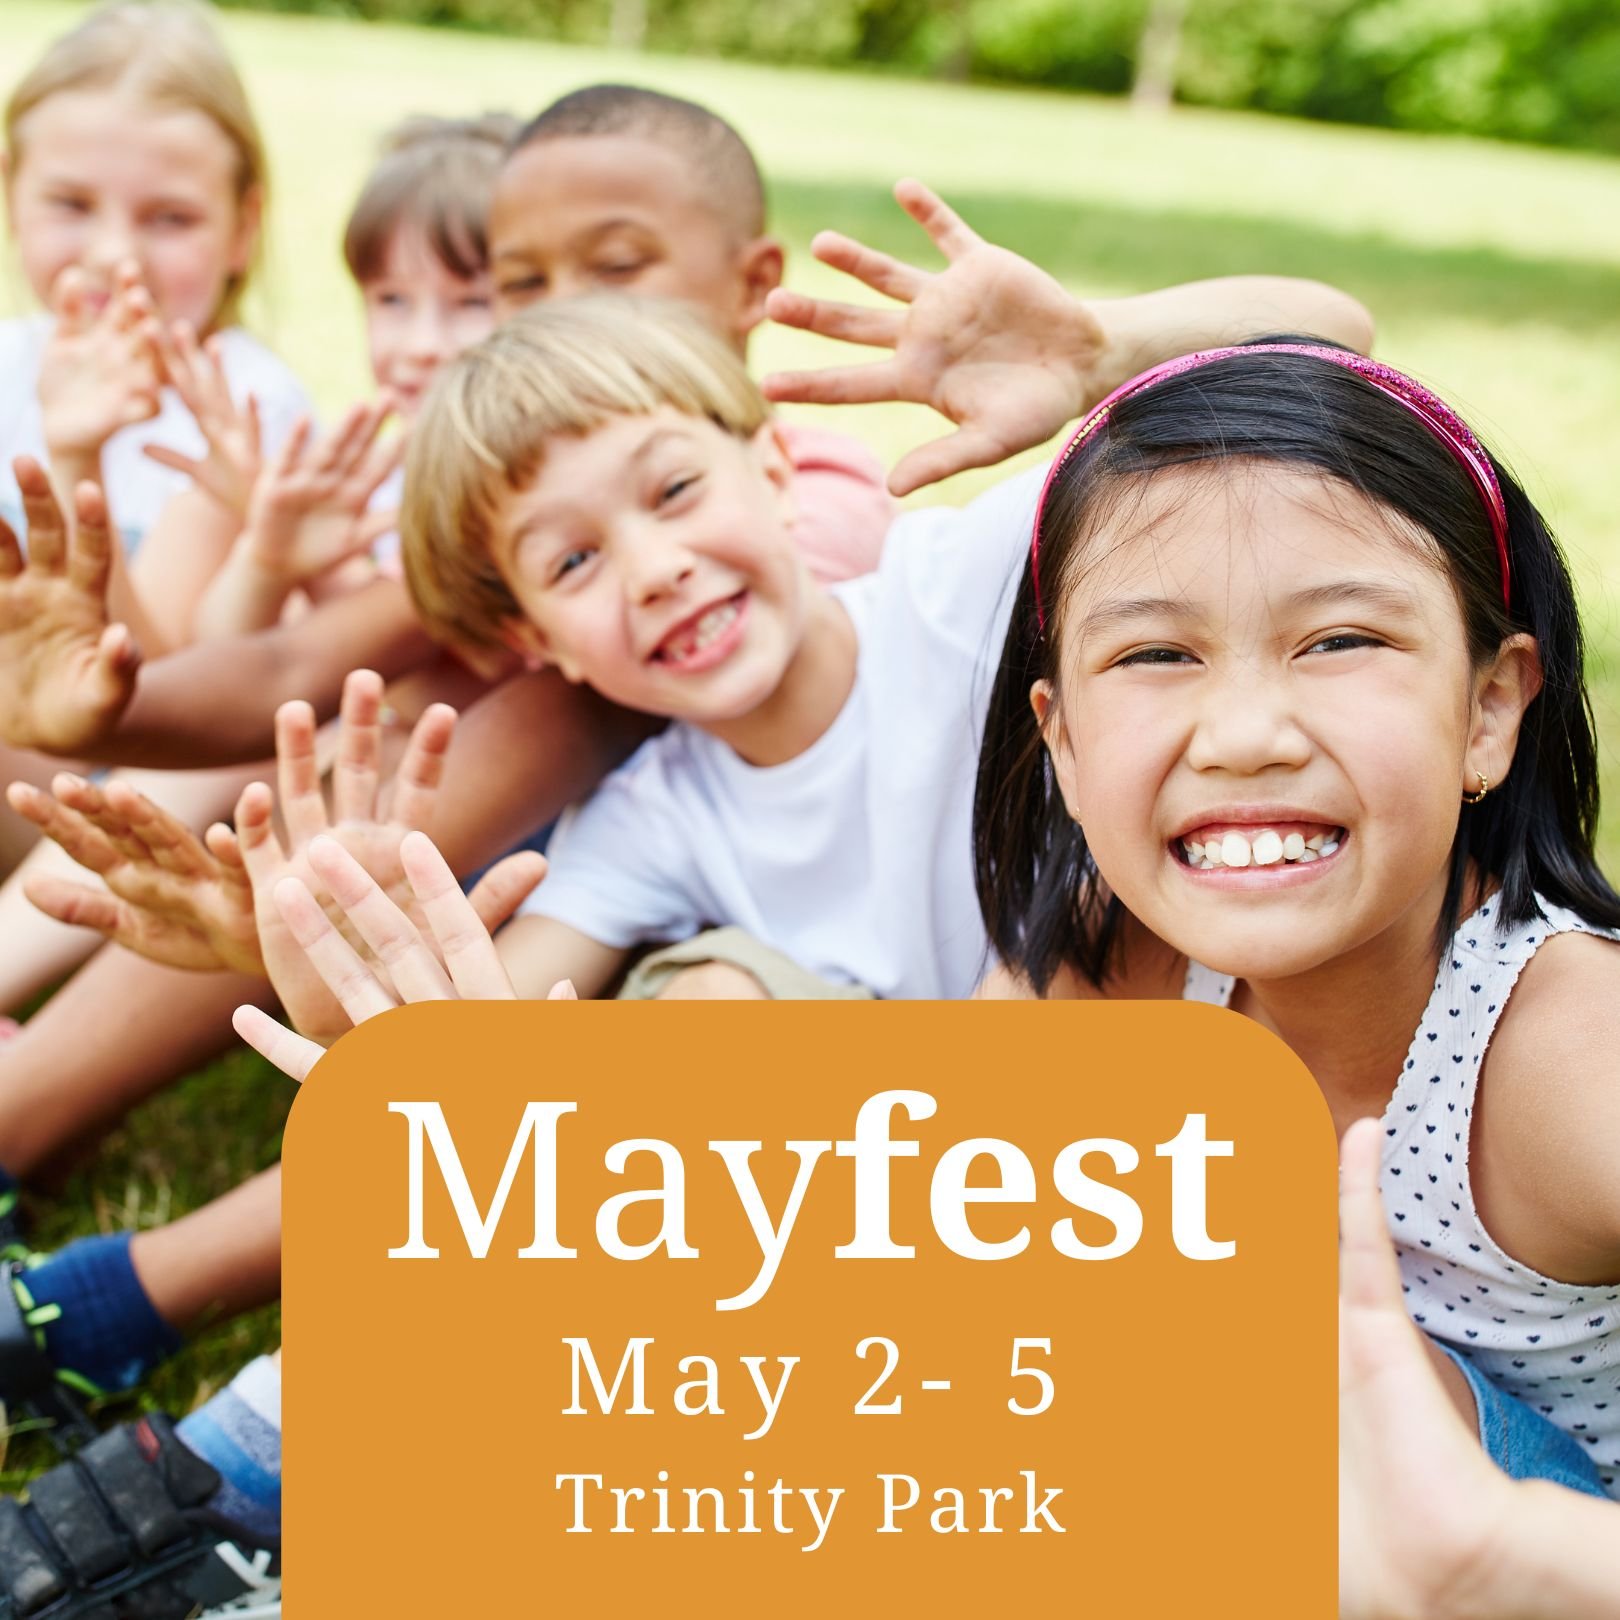 MayFest is this weekend! One of Fort Worth's long-standing spring traditions, this festival is sure to be fun for the whole family. Get a full schedule at mayfest.org.

#asaygrouprealestate #realestate #designstyle #homedesign #designinspo #homesweet